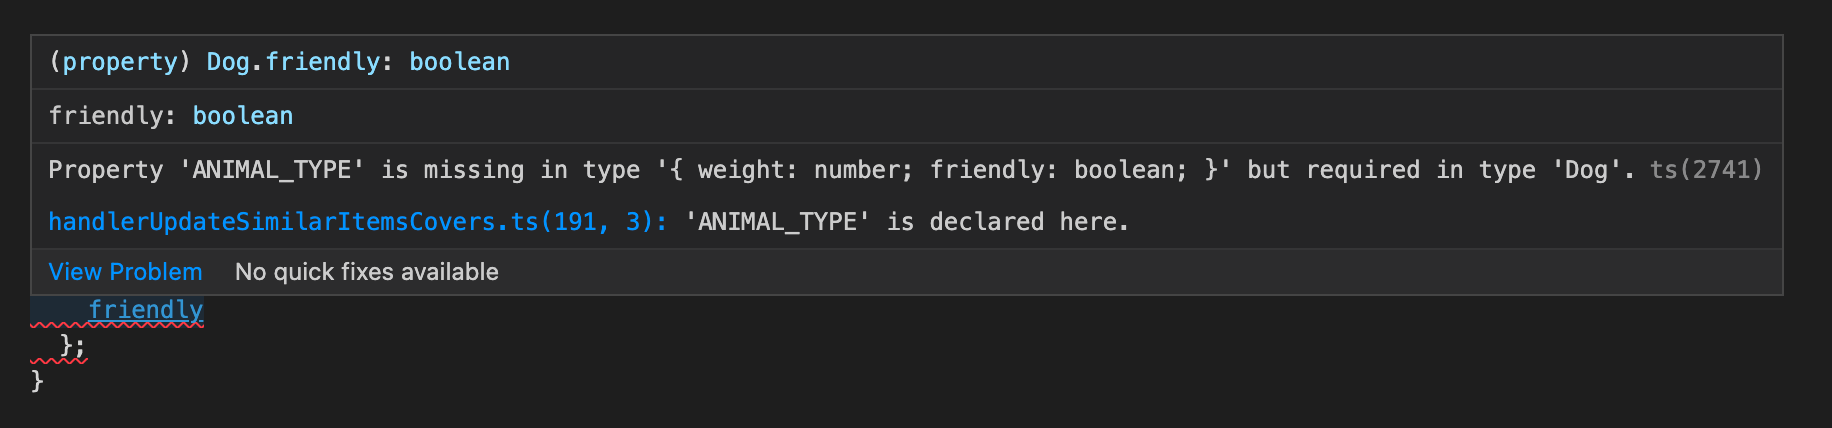 Screenshot of TypeScript displaying a warning in the code editor as a result of not providing a single value for the ANIMAL_TYPE property.